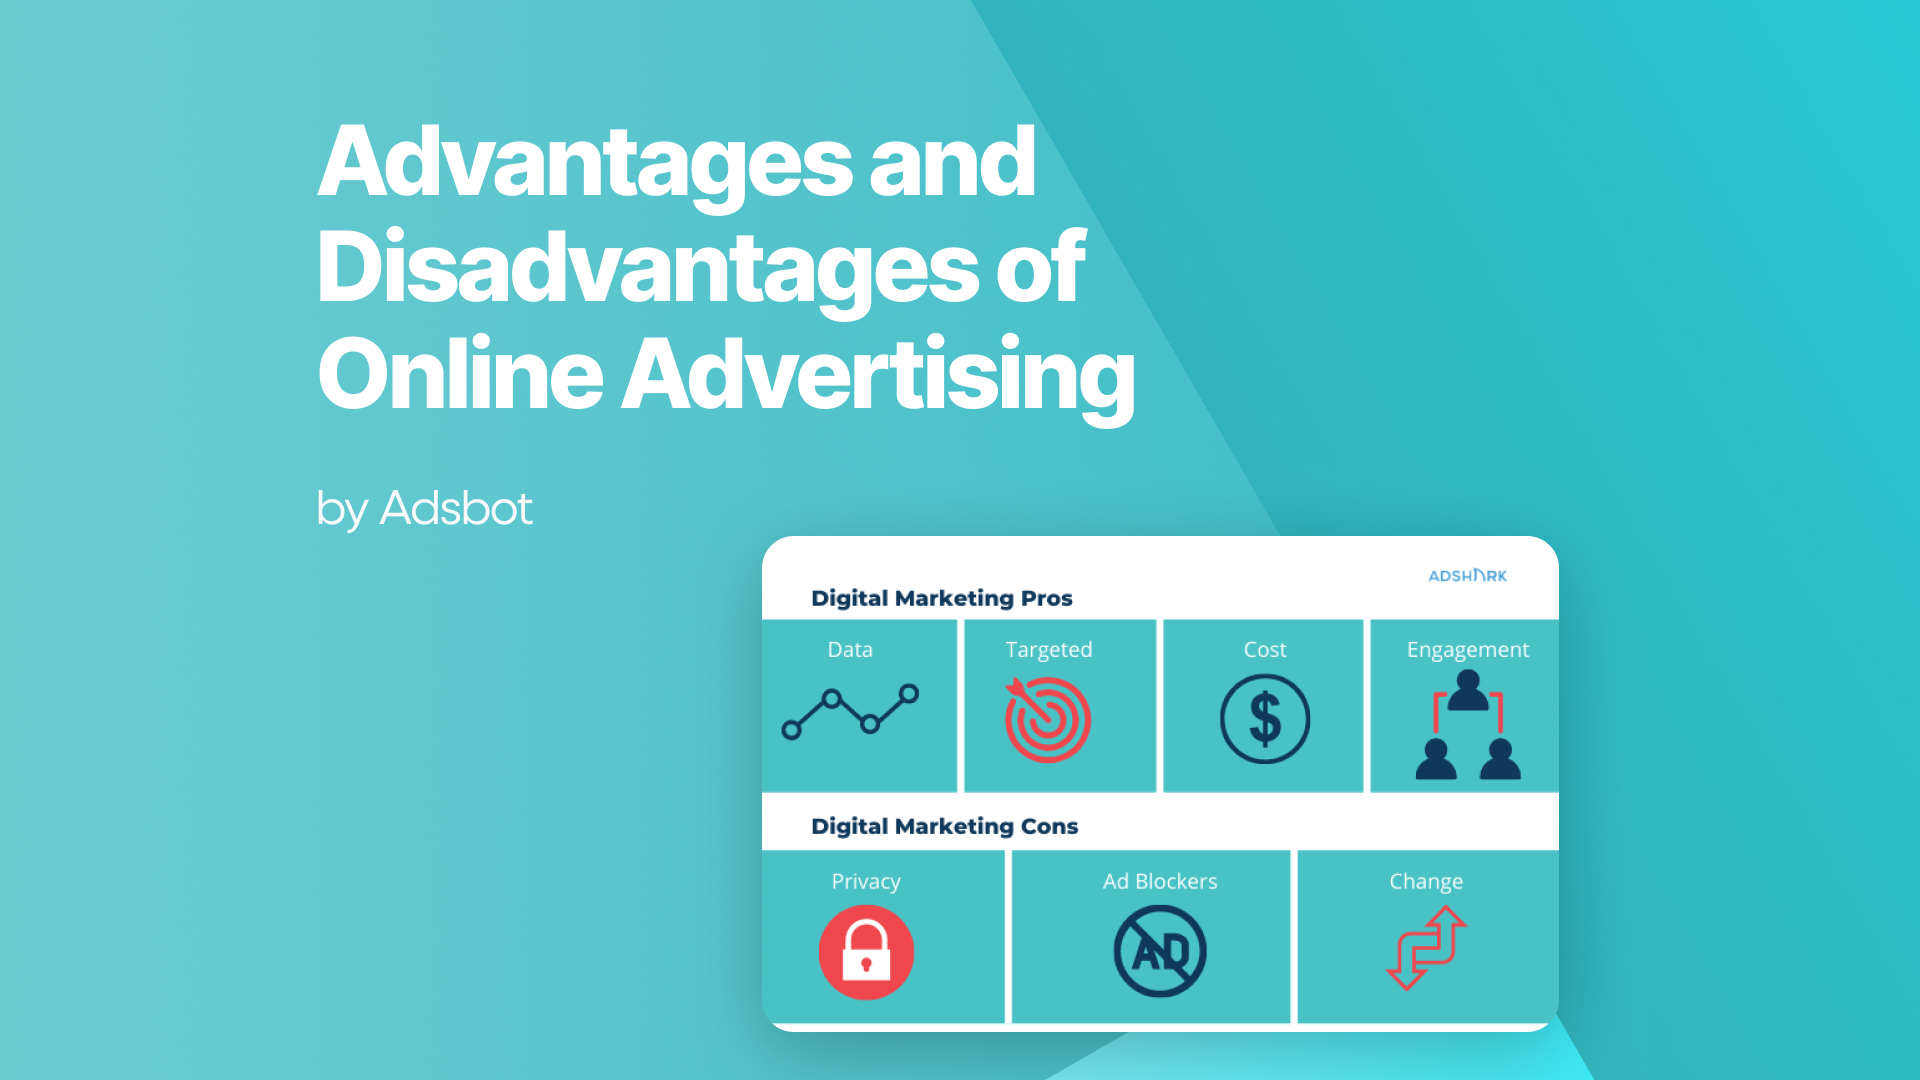 Advantages and Disadvantages of Online Advertising